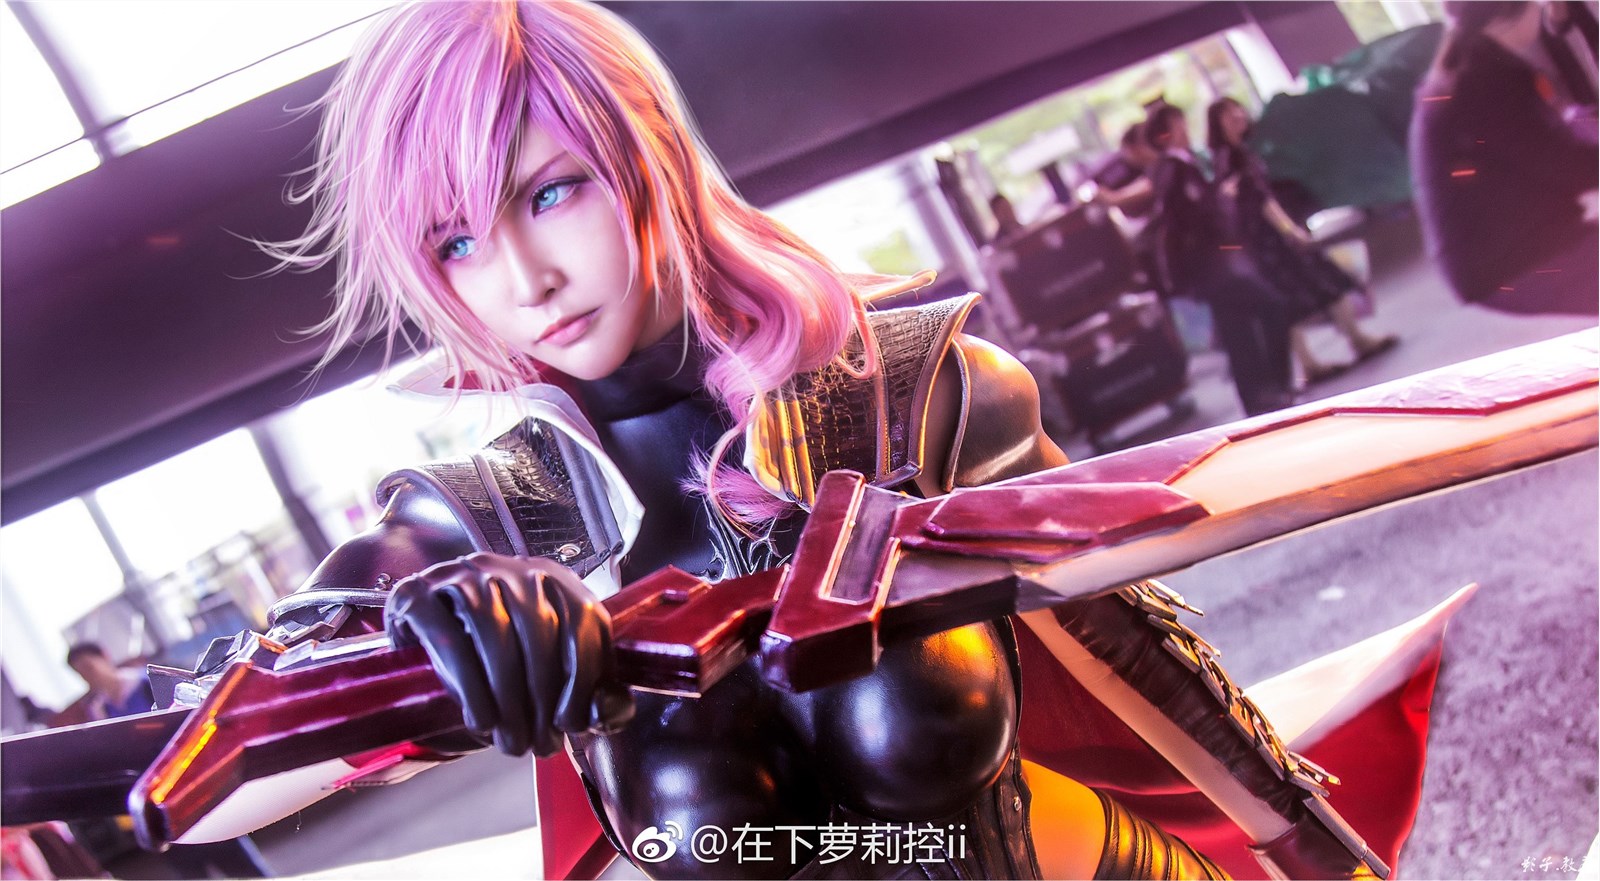 Demon King next girl control II weibo with Picture 232(109)